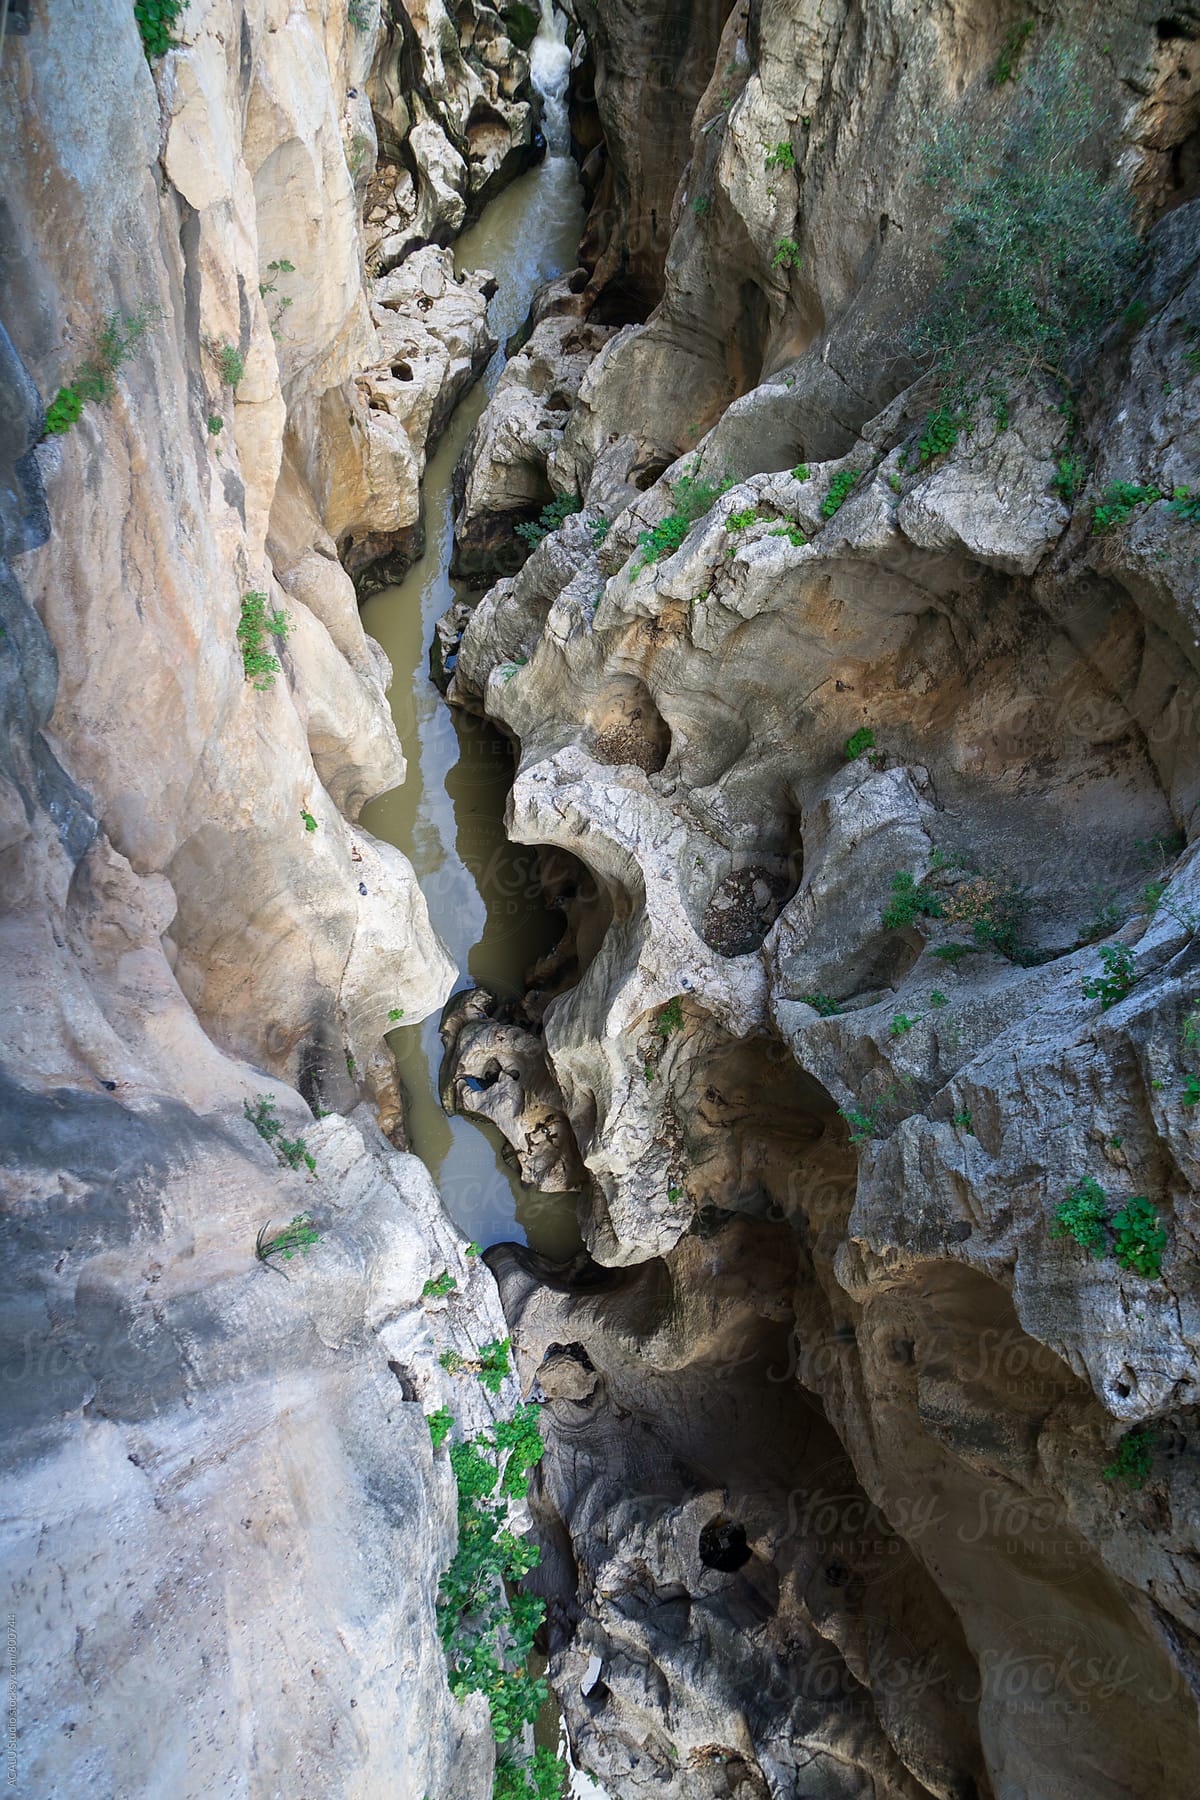 View from above at the edge of a cliff in Caminito del Rey